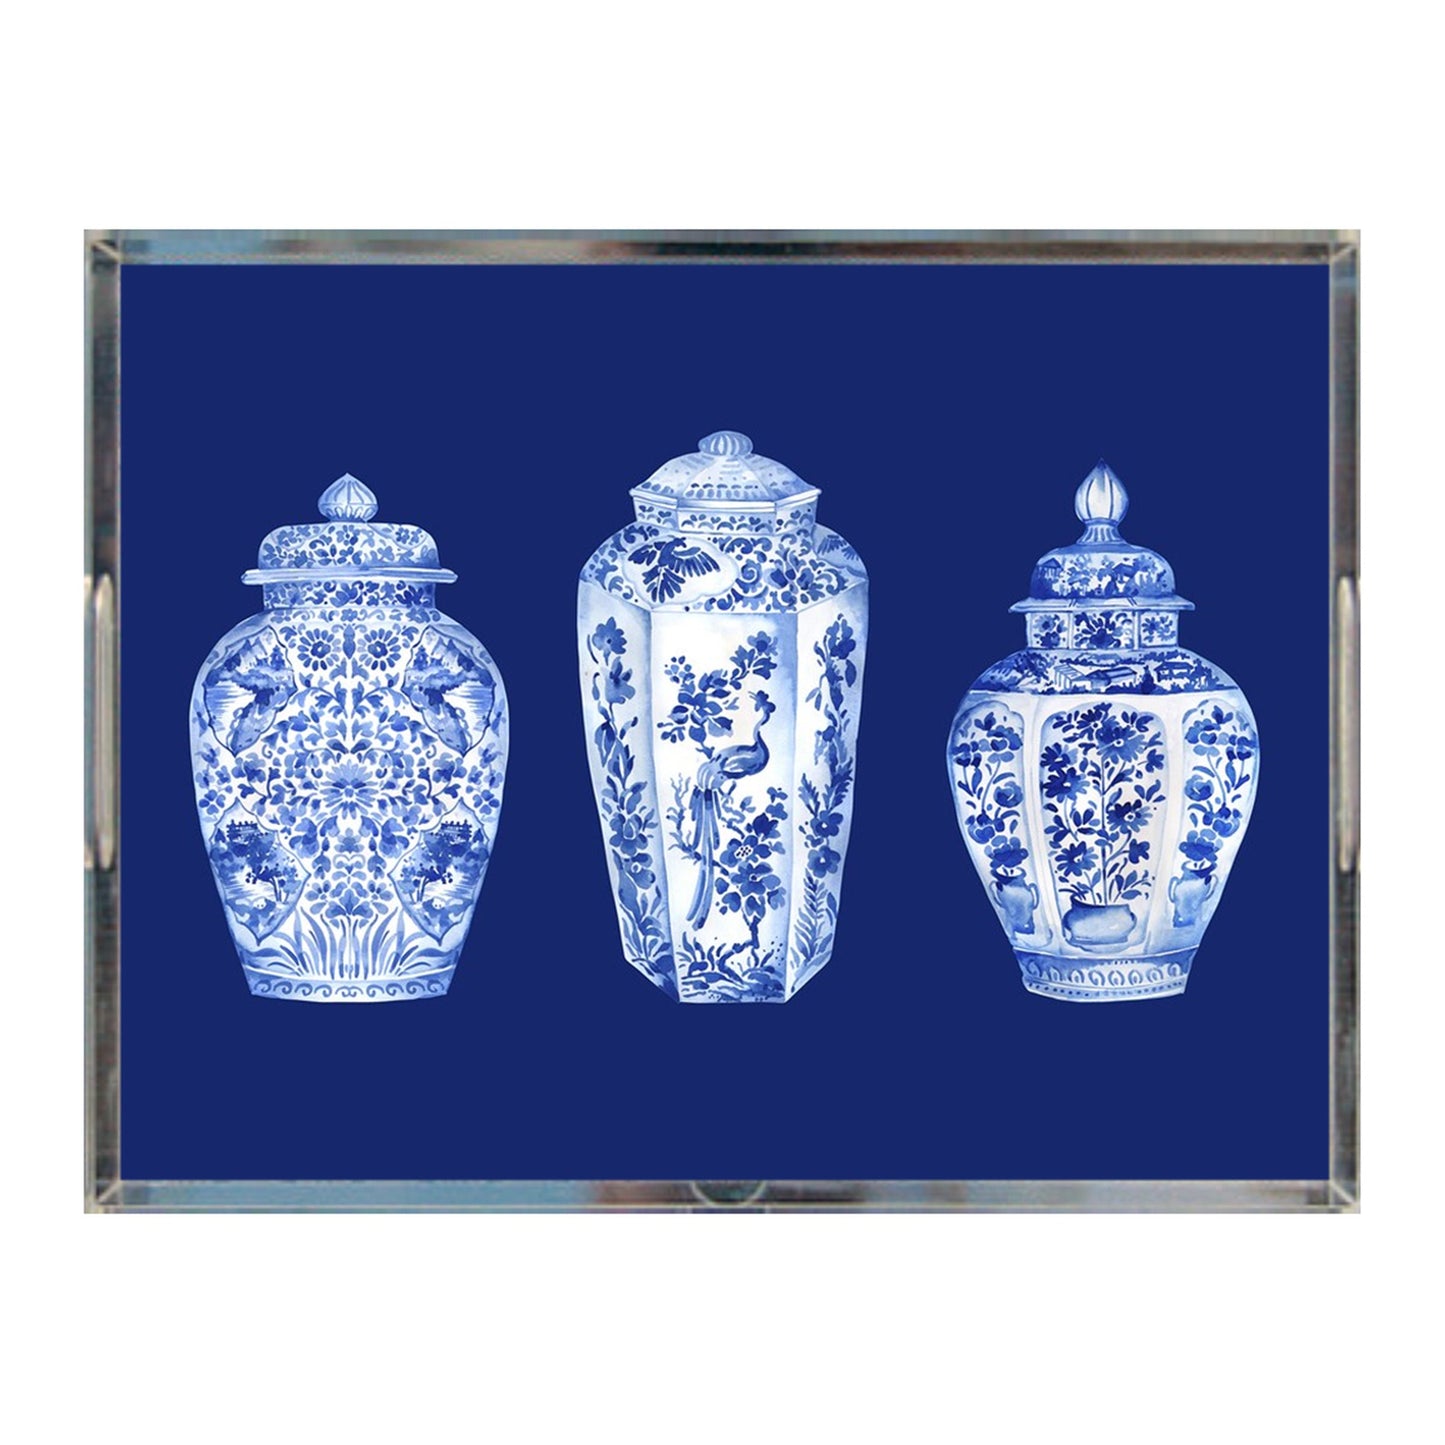 Ginger Jars Acrylic Tray 8.5" x 11", Navy Blue, Chinoiserie